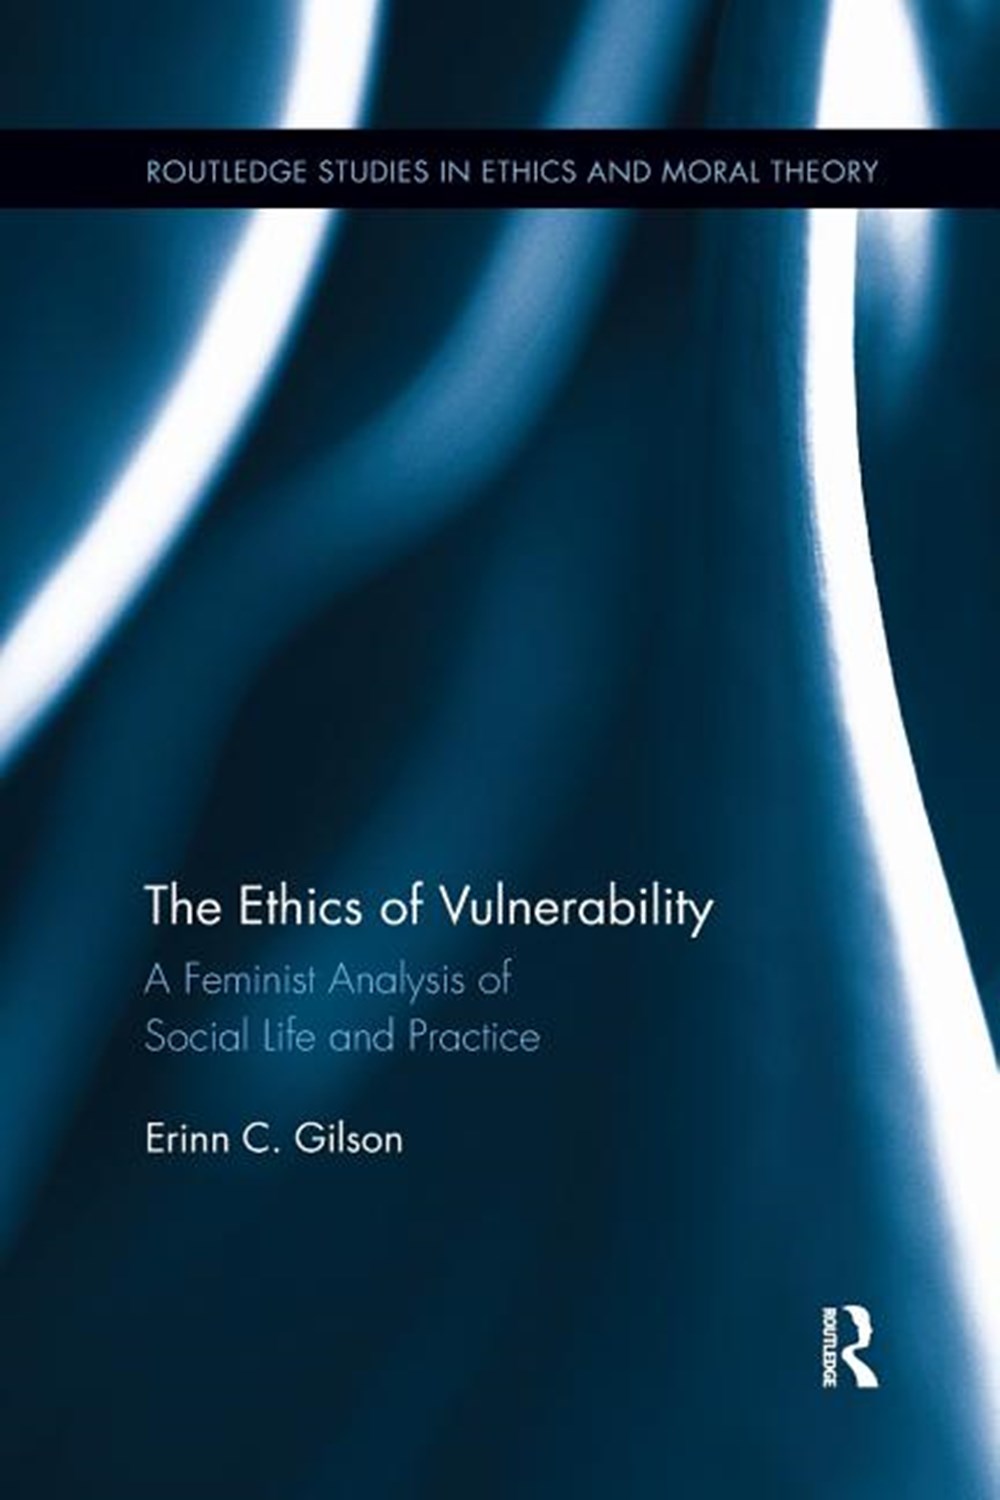 Ethics of Vulnerability: A Feminist Analysis of Social Life and Practice